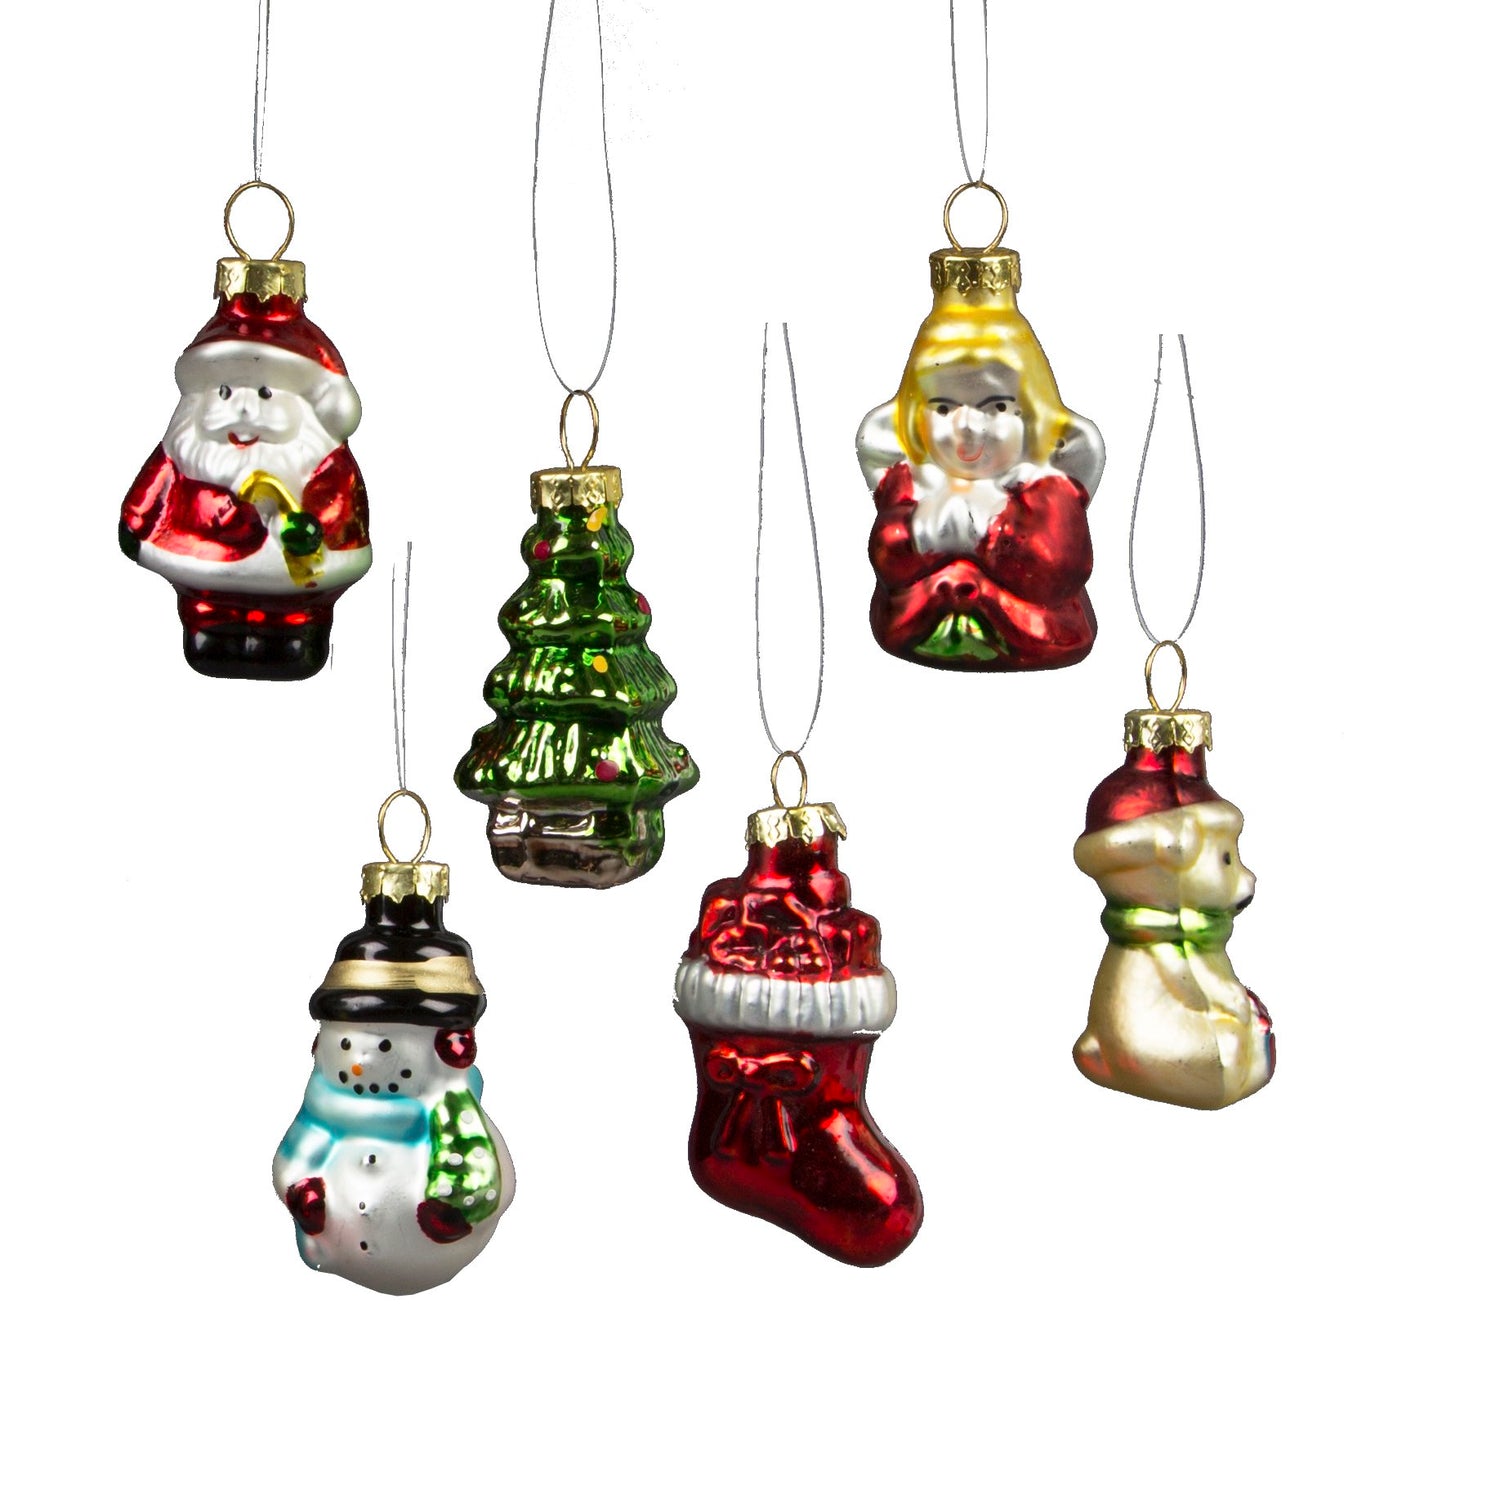 Set of 6 super cute glass multi-coloured Christmas characters that will bring some festive fun to your tree this year :)